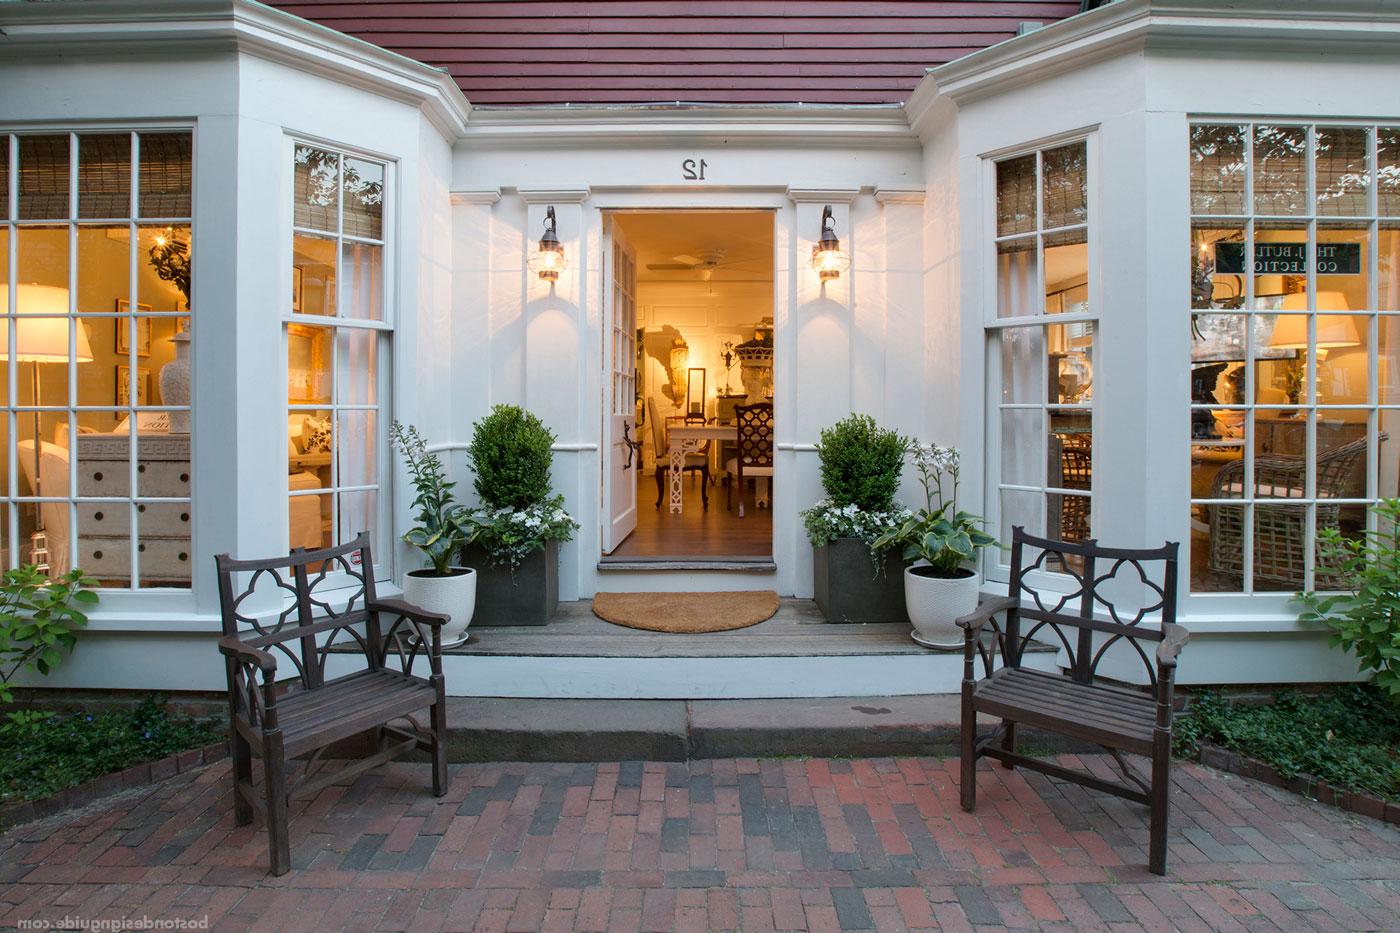 J. Butler Collection boutique store front in Nantucket